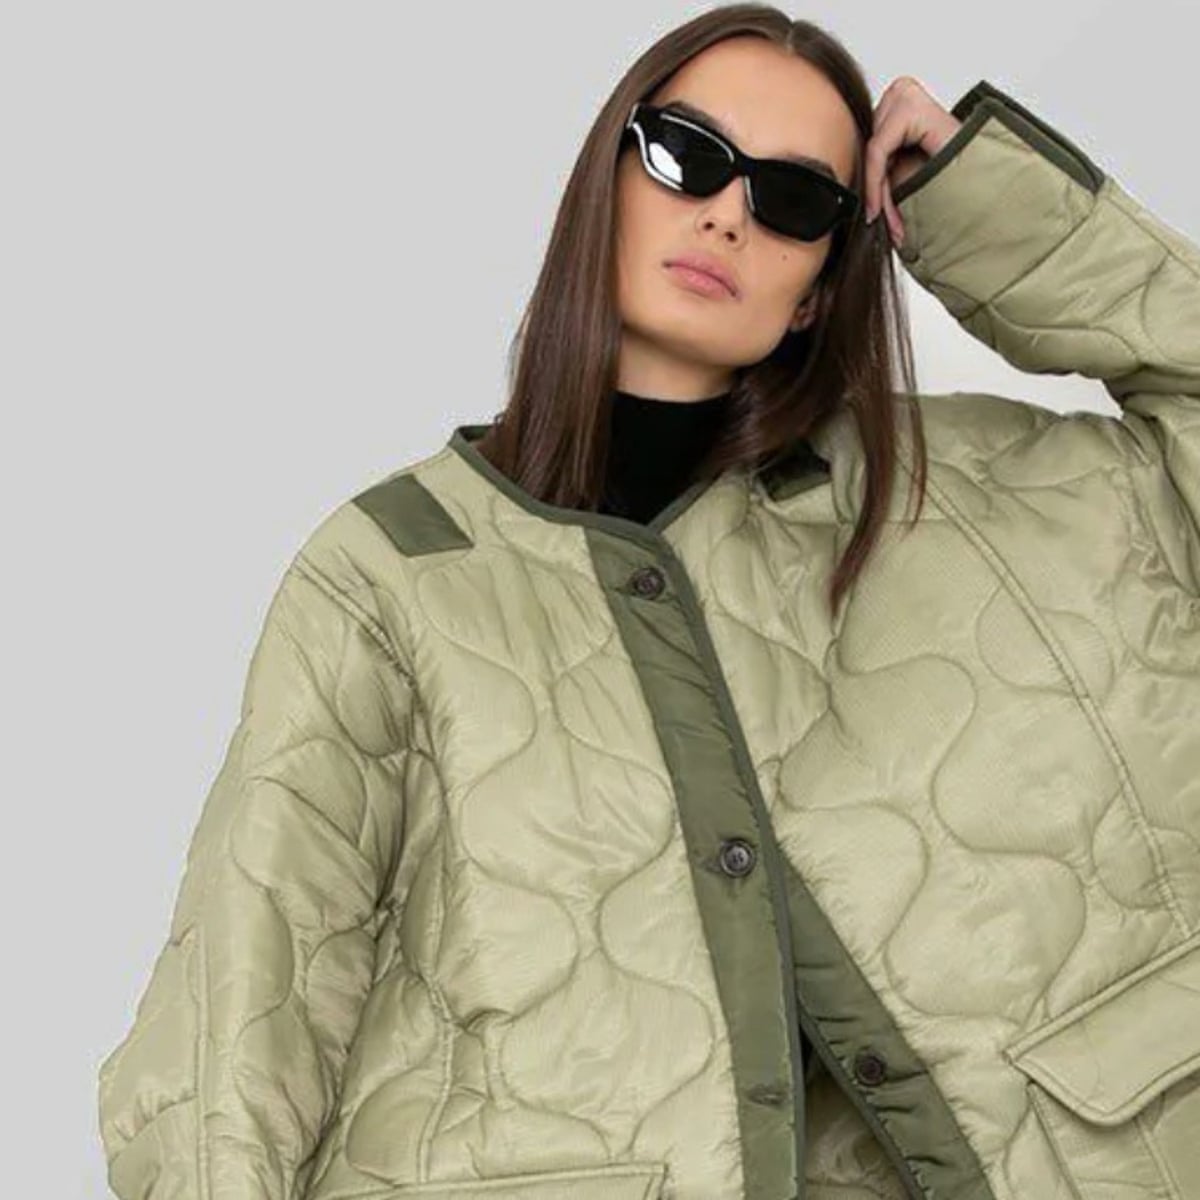 Quilted jackets set to become outerwear of choice this season